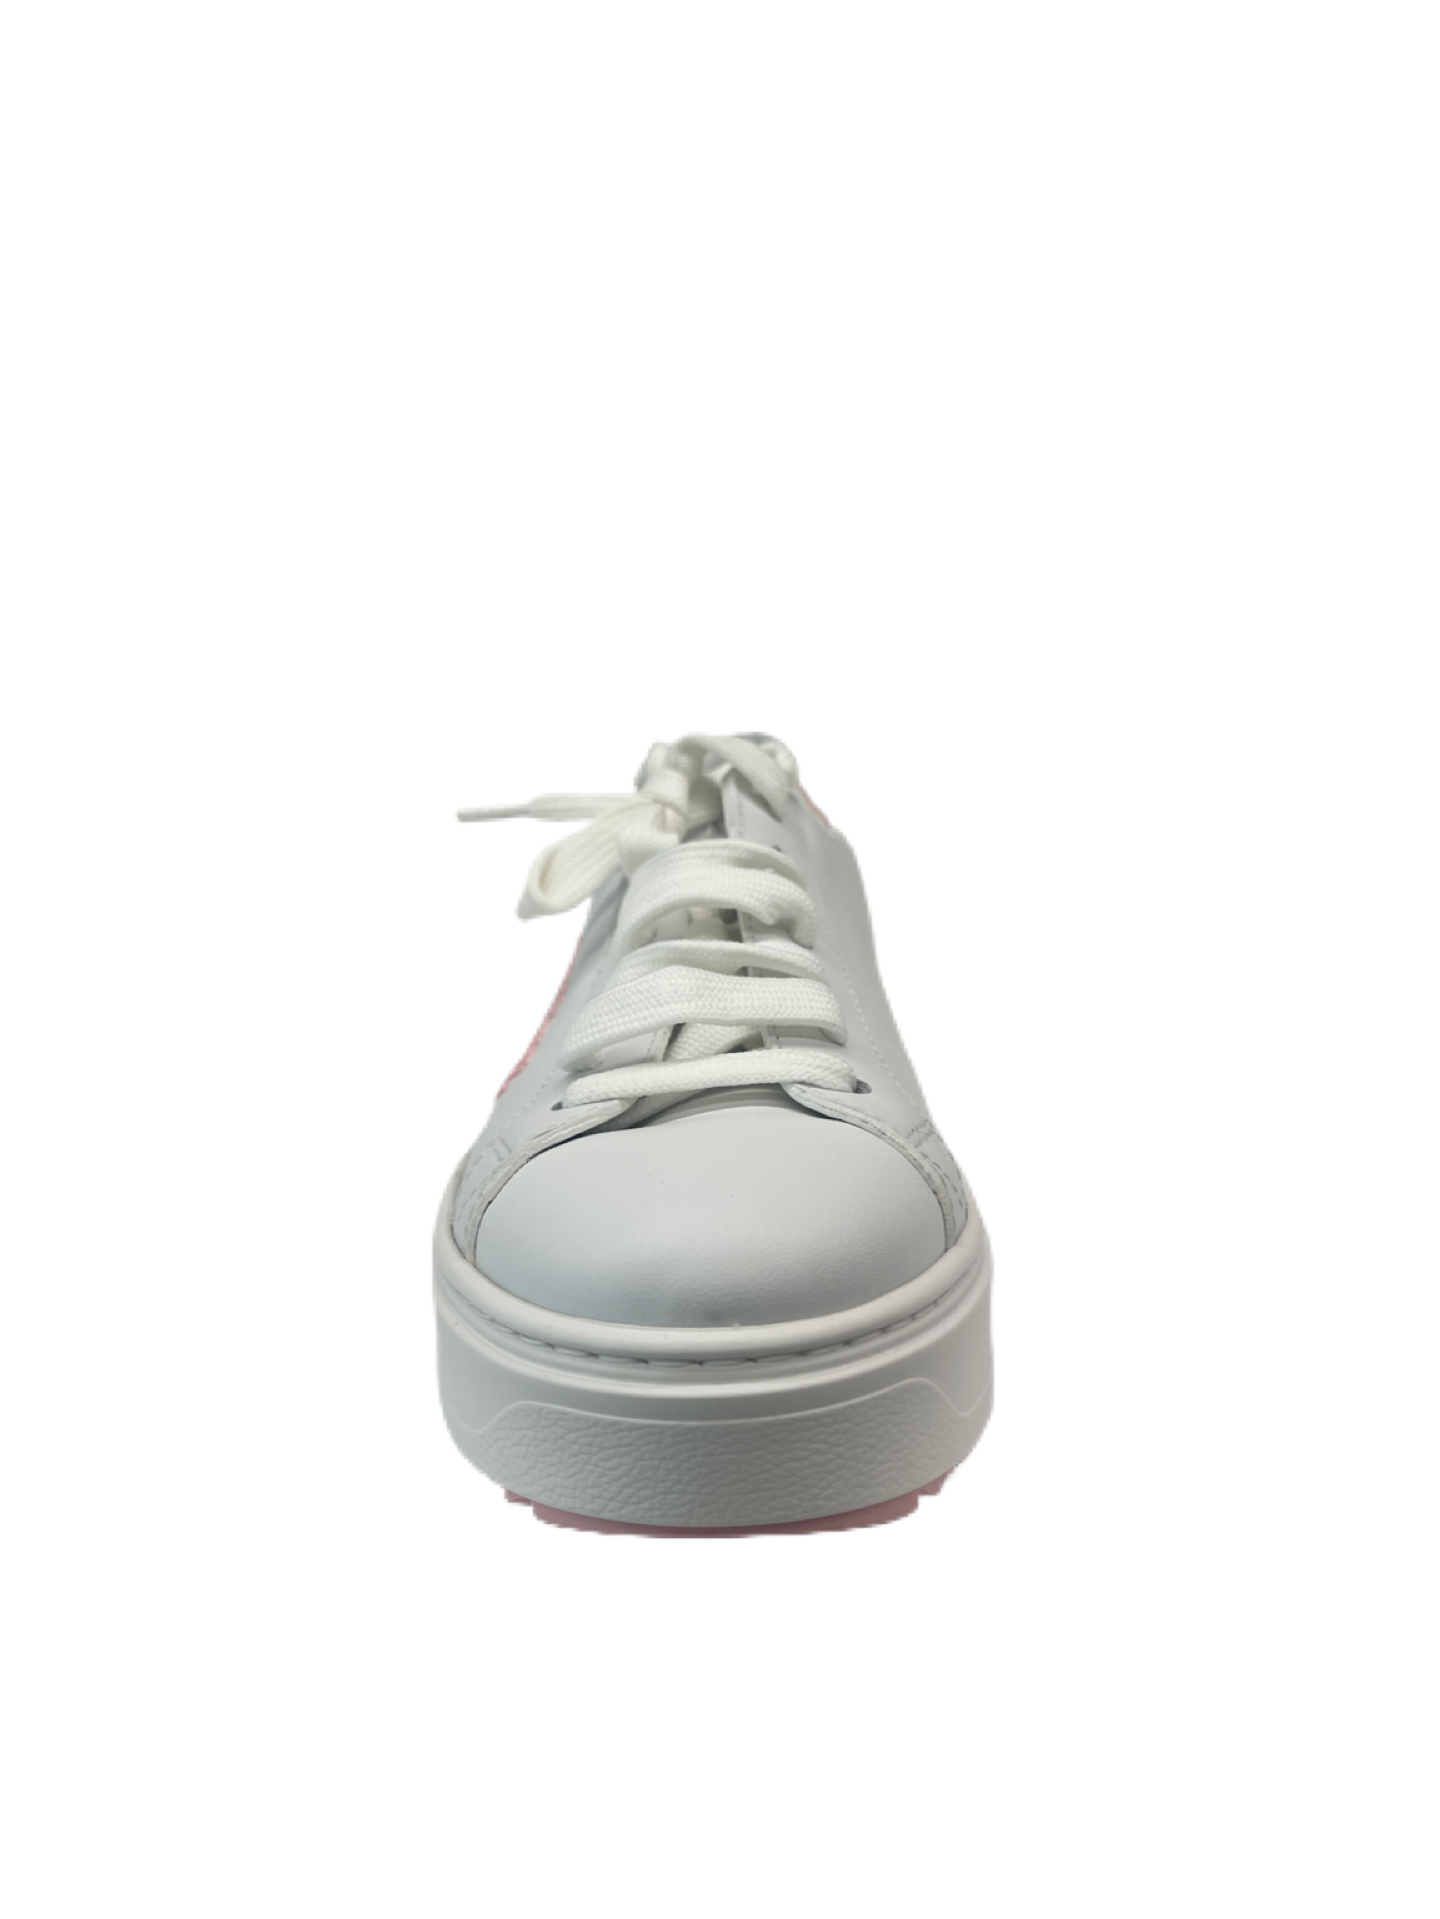 Louis Vuitton White Sneakers with Pink Embroidered Text Logo. Size: 40